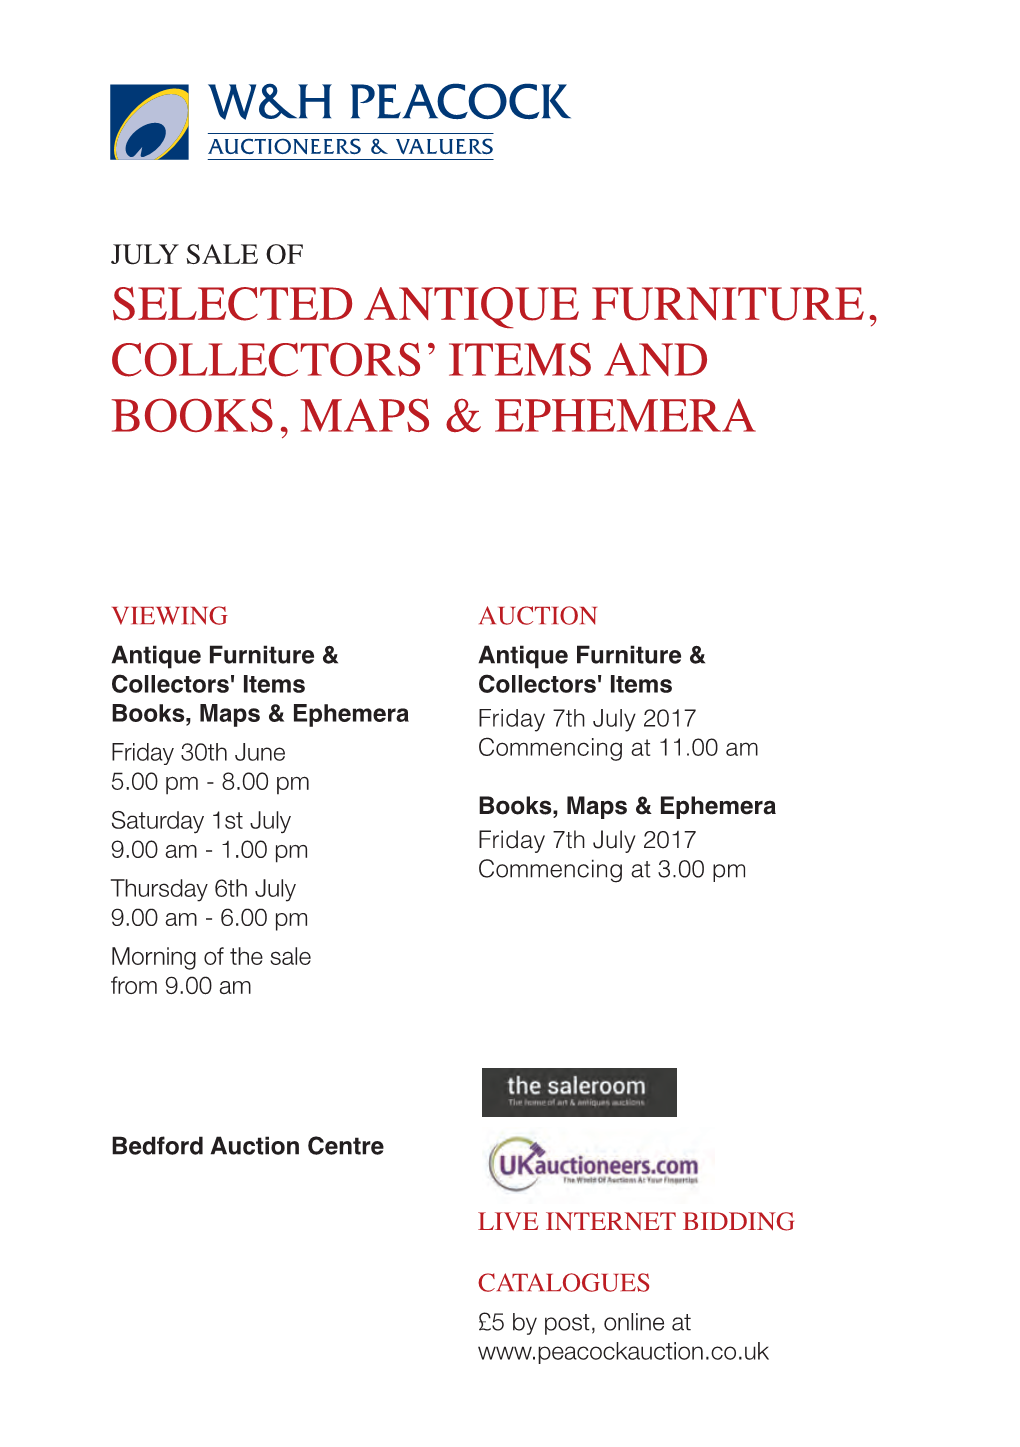 Selected Antique Furniture, Collectors' Items And